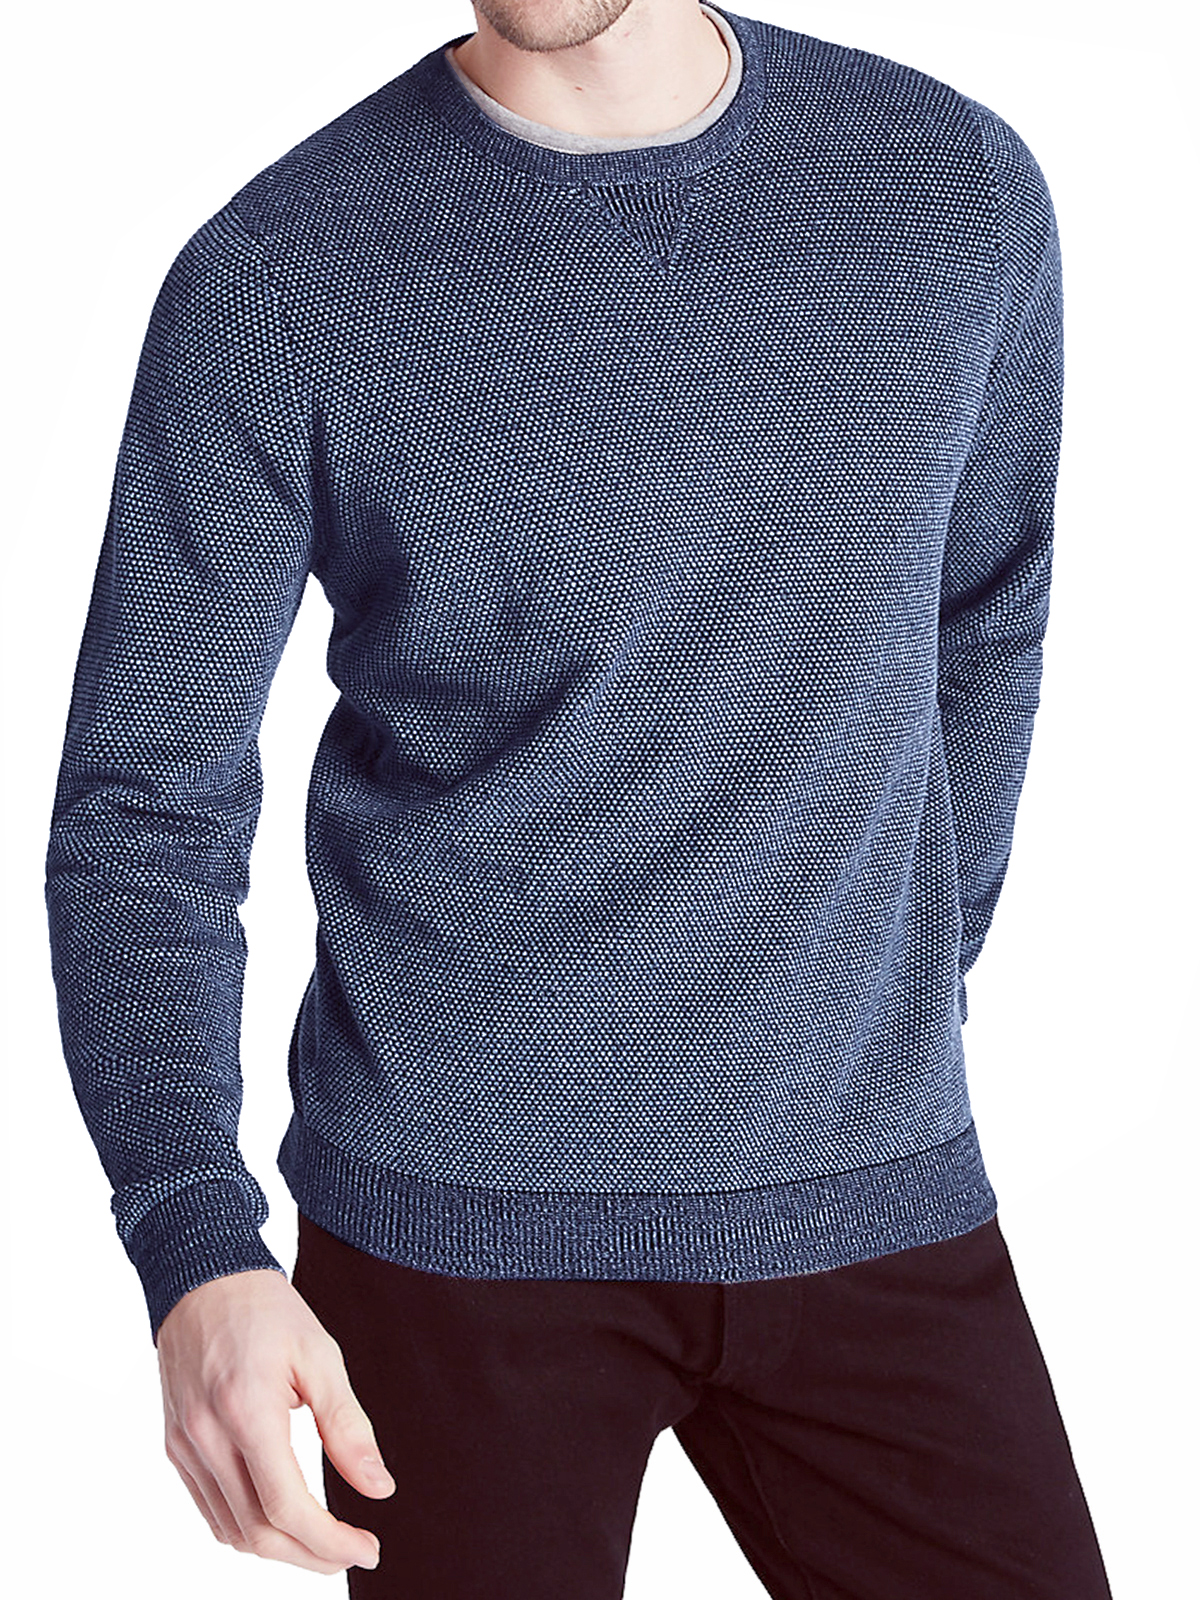 Marks and Spencer - - M&5 DENIM Pure Cotton Textured Jumper - Size ...